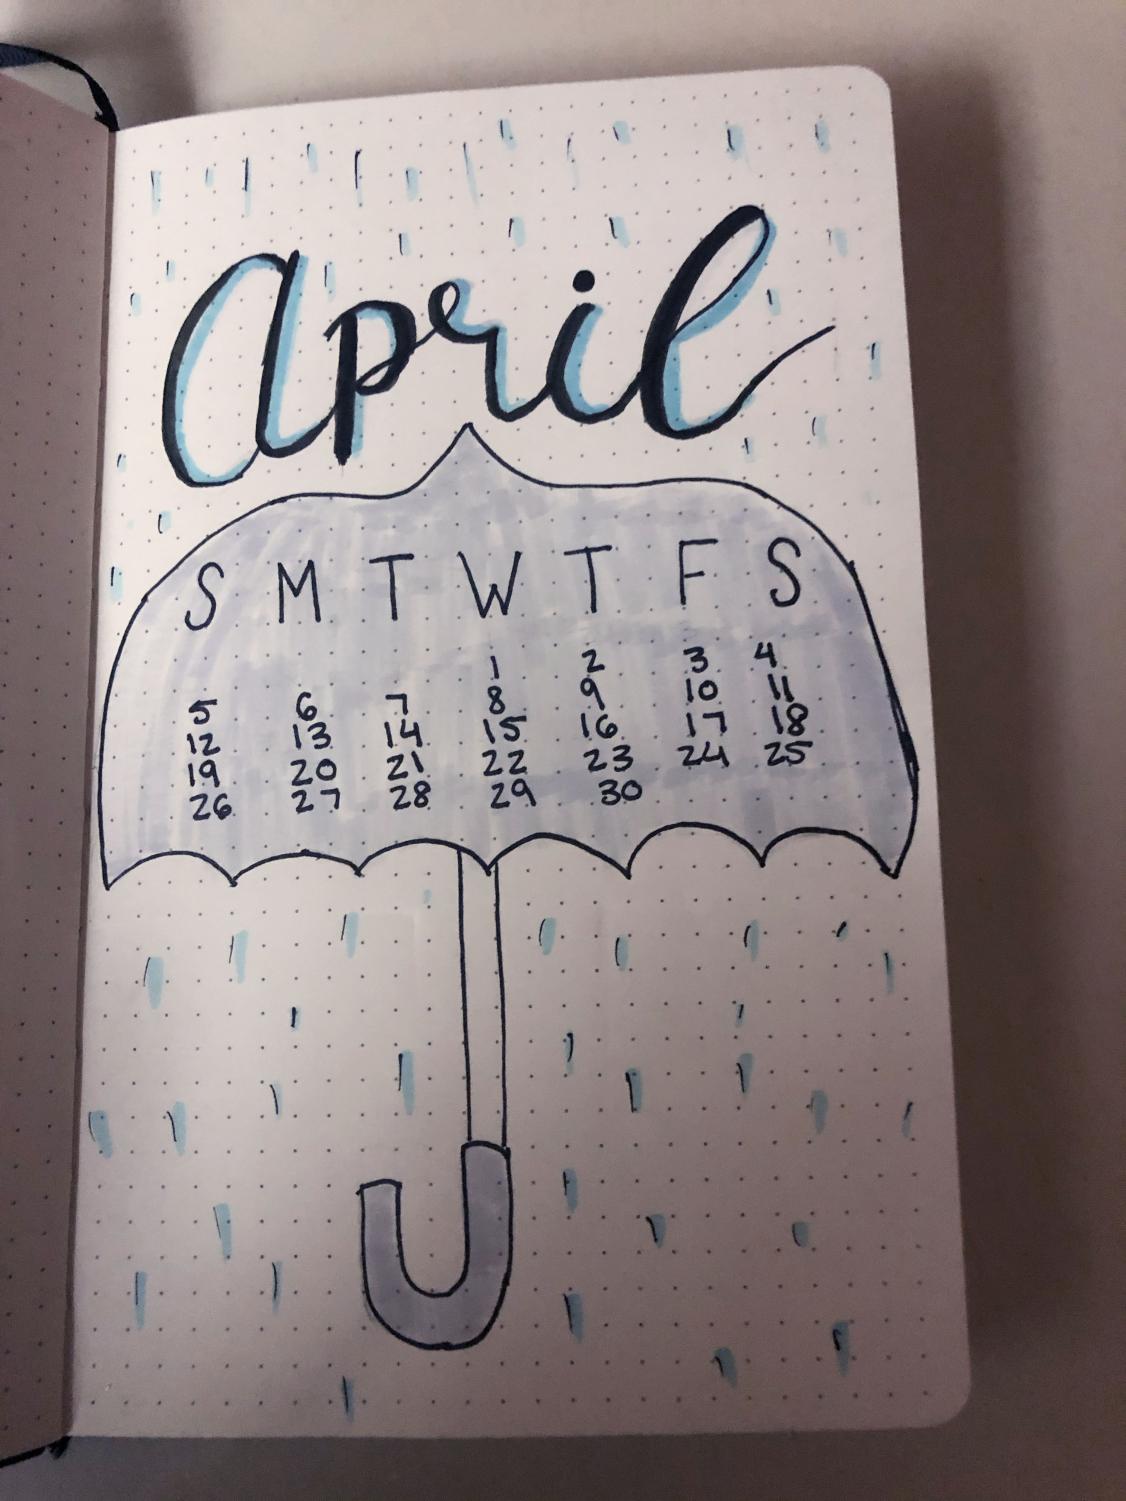 How to set up a bullet journal – The Epitaph